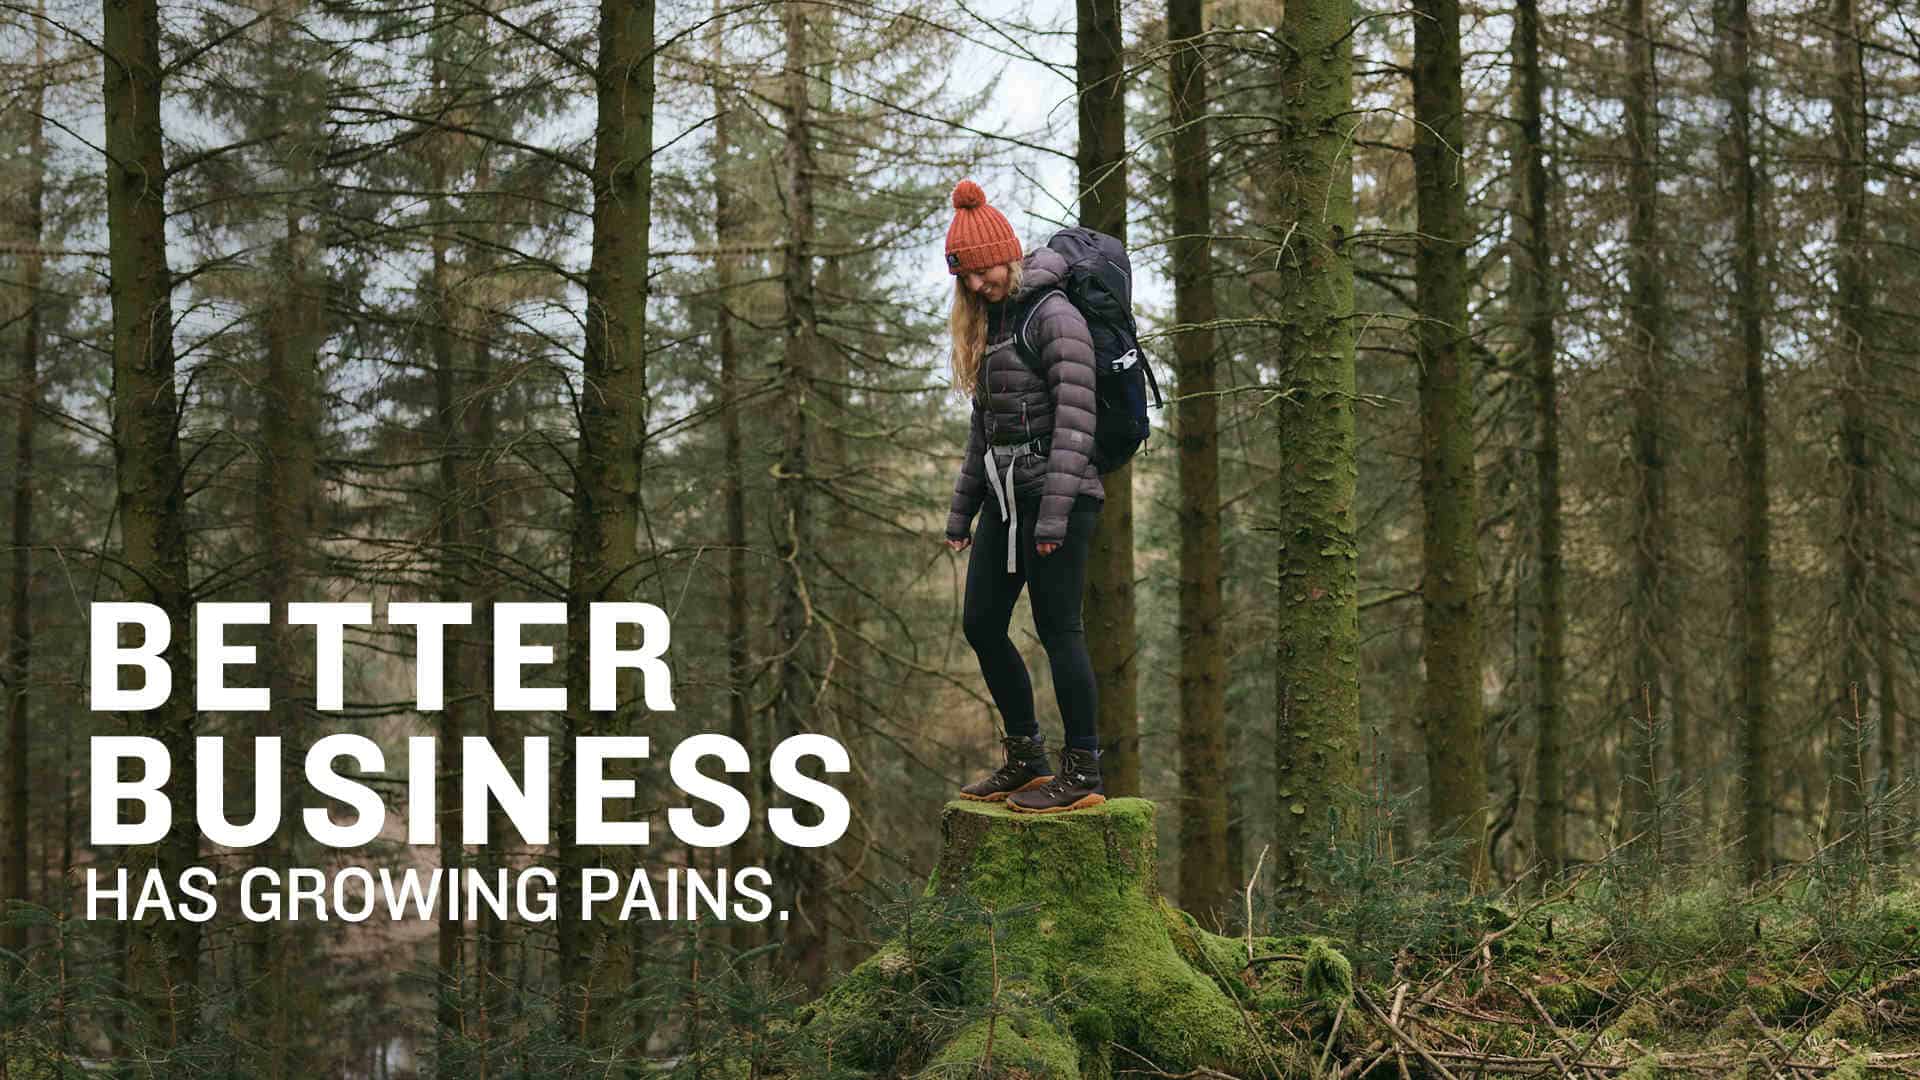 Person stood on a mossy tree stump in a wood. They're wearing Vivobarefoot shoes, a bobble hat and a rucksack. Text reads "Better business has growing pains."